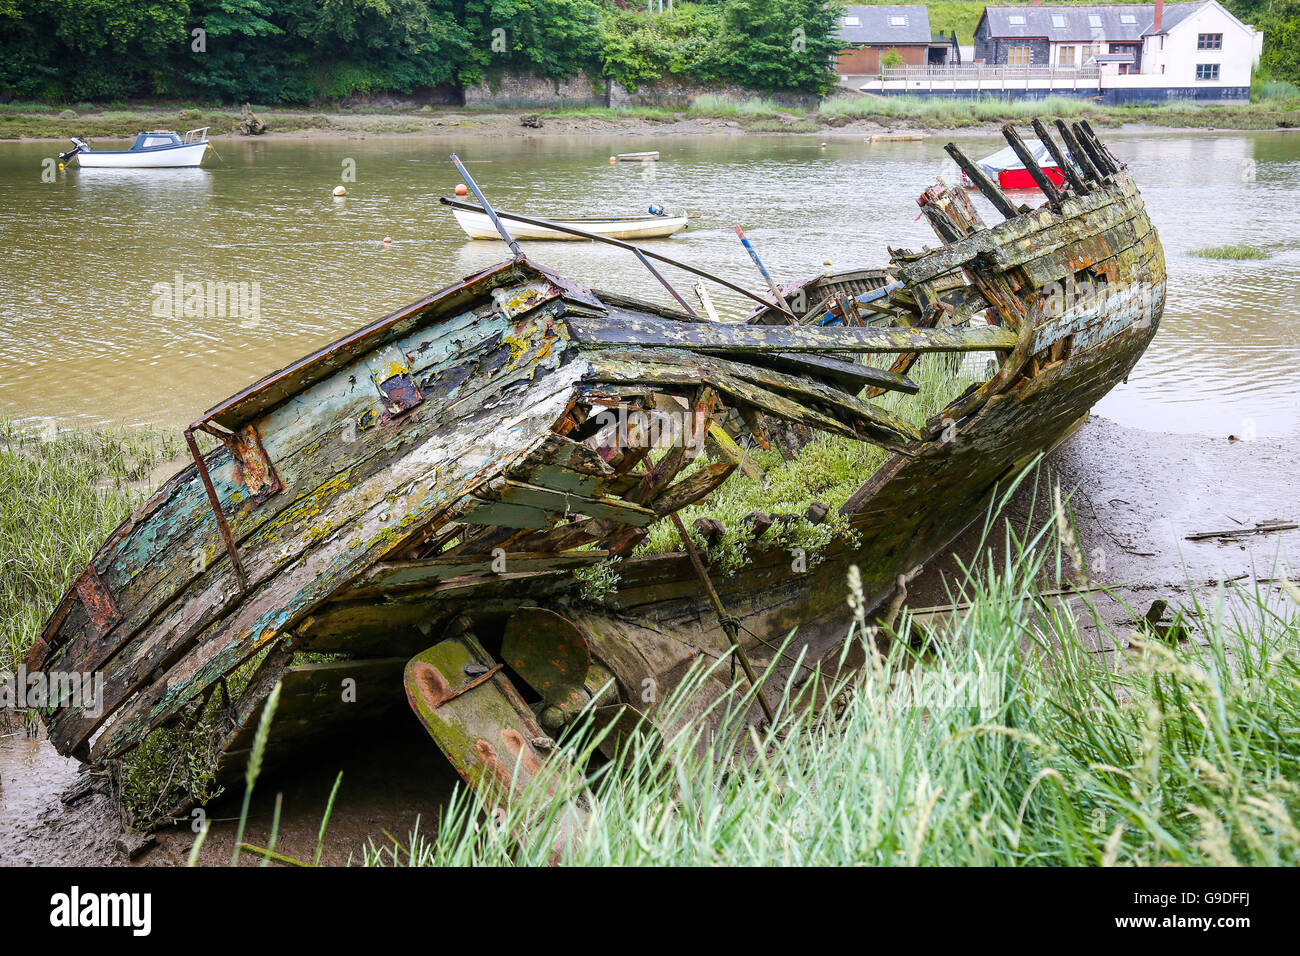 The hulk of an old timber ship lying on a coastal estuary. The vessel is rotting and covered in lichen and weeds Stock Photo